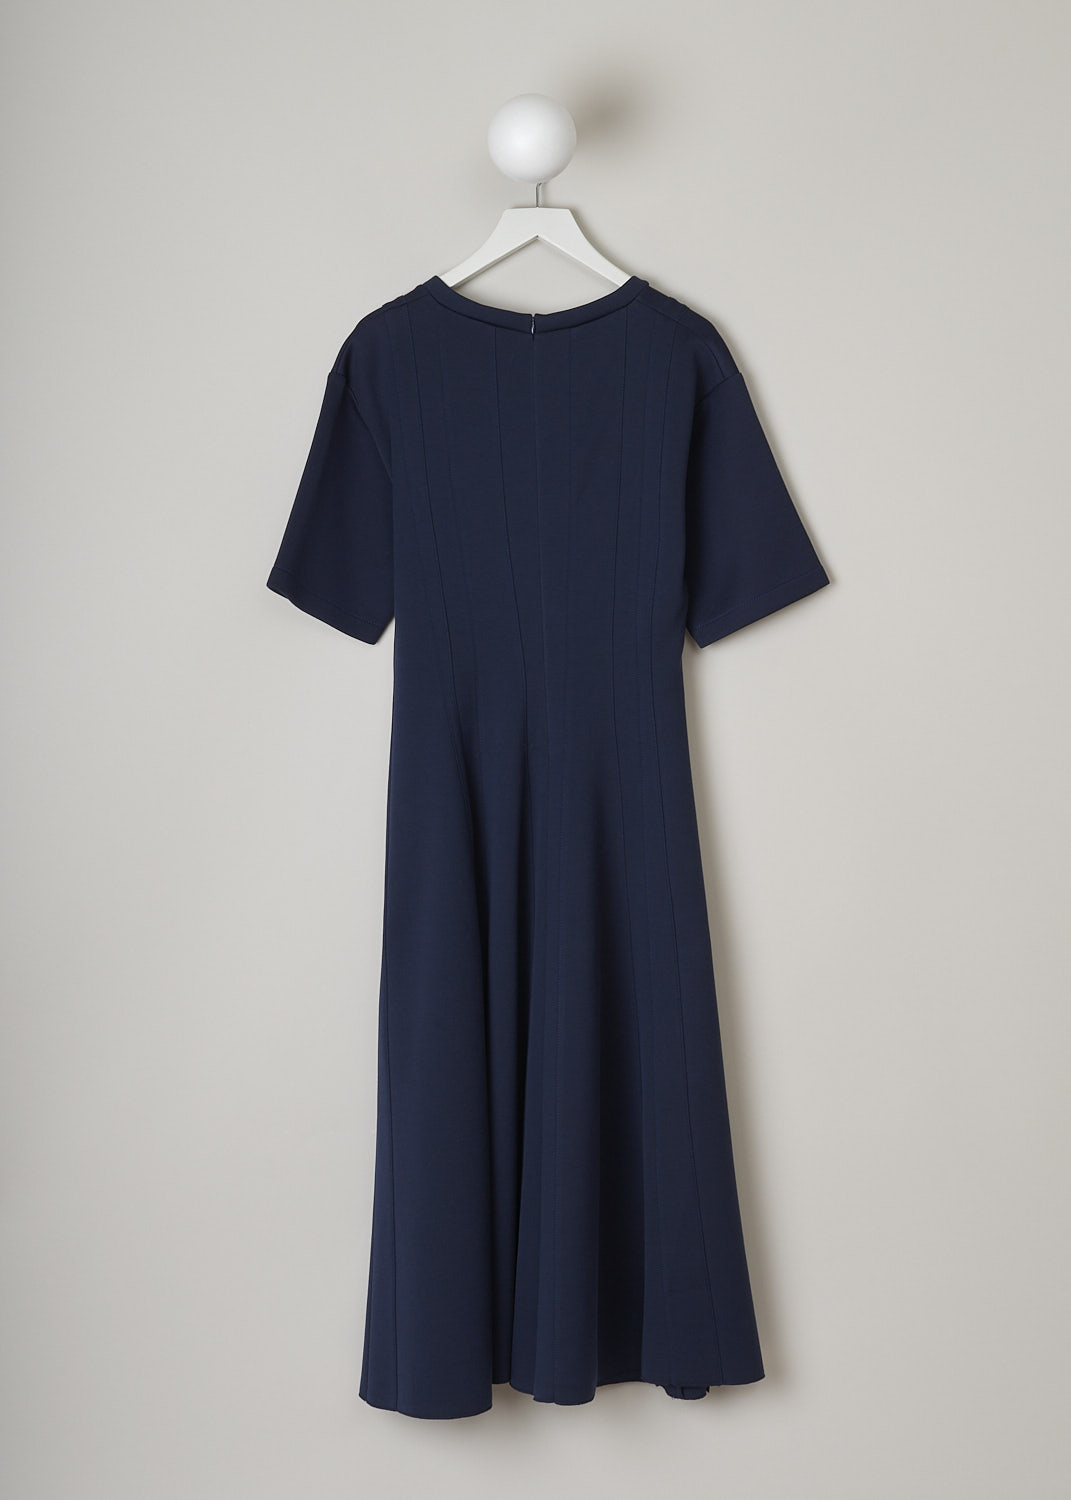 MARNI, NAVY BLUE JERSEY MAXI DRESS, ABJE0877A0_TCY52_00B80, Blue, Back, This navy blue jersey maxi dress has a crewneck and short sleeves. This fit-and-flare dress has exposed darts that run vertically along the length of the dress. In the back, a concealed centre zip functions as the closure option.  
